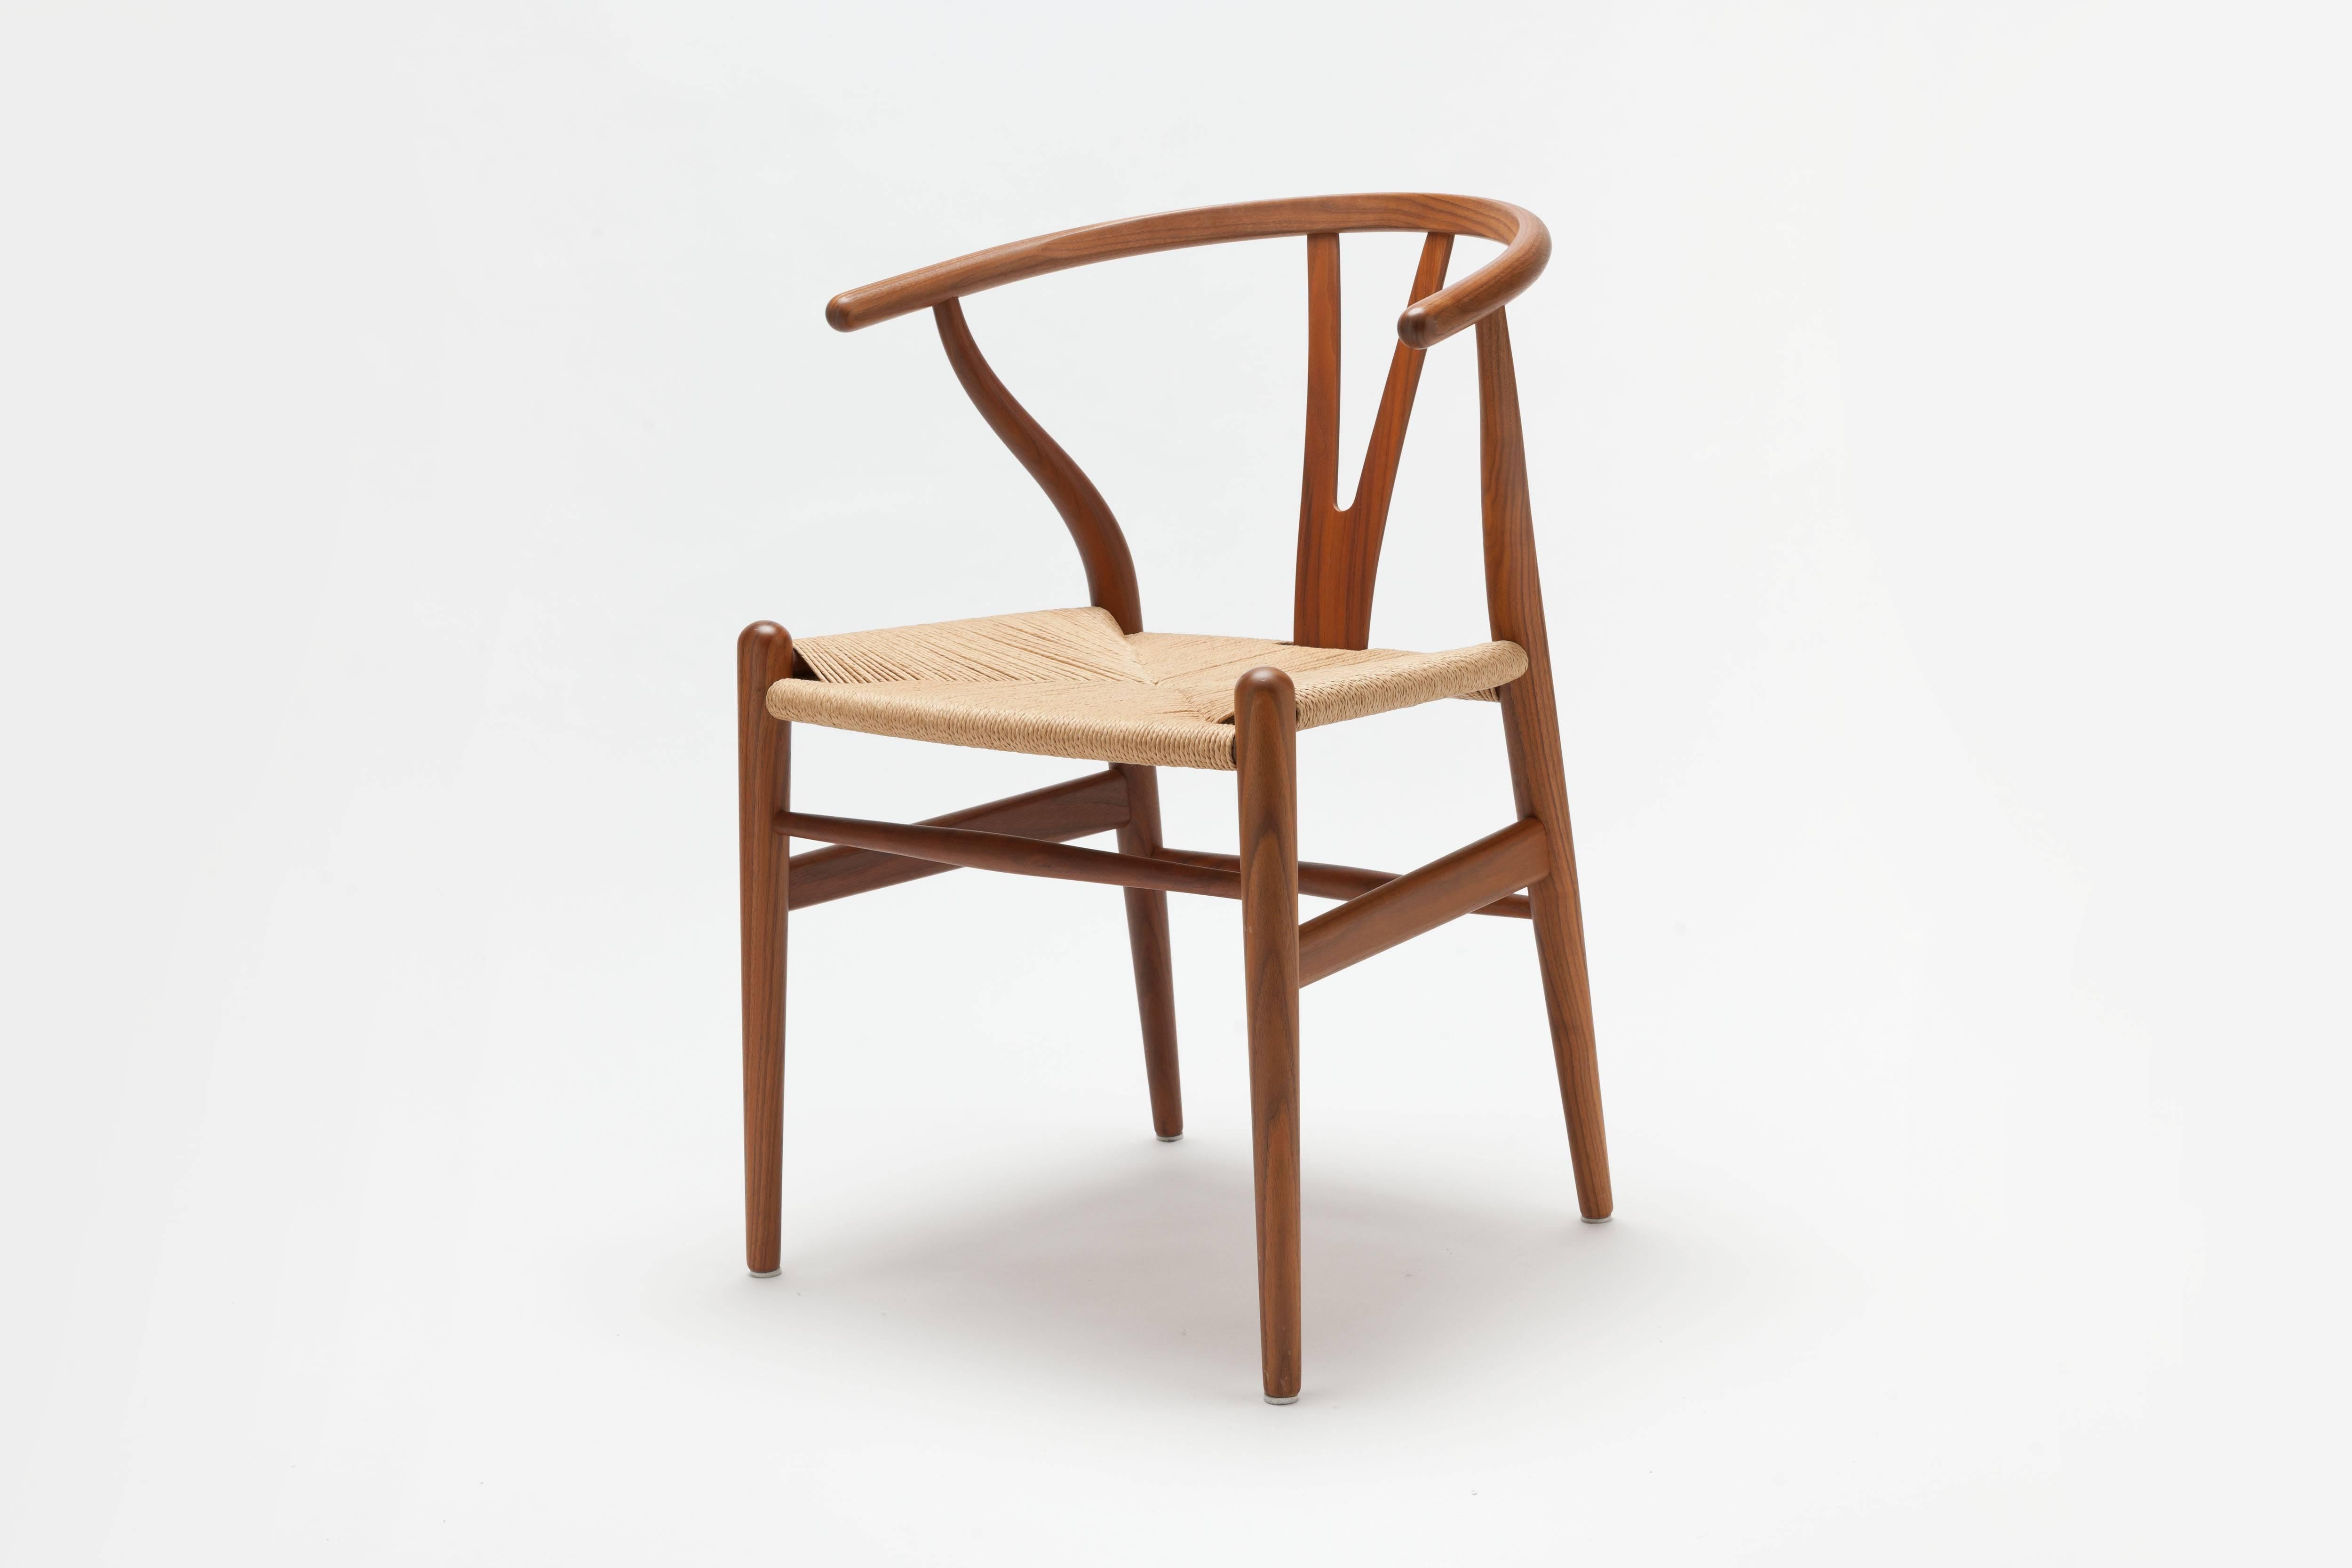 Single Wishbone / CH24 Chair executed in the most exclusive wood timber available, solid walnut, with handwoven natural paper cord. 

This single chair is an exhibit model in excellent as new condition from recent production that ships from stock.